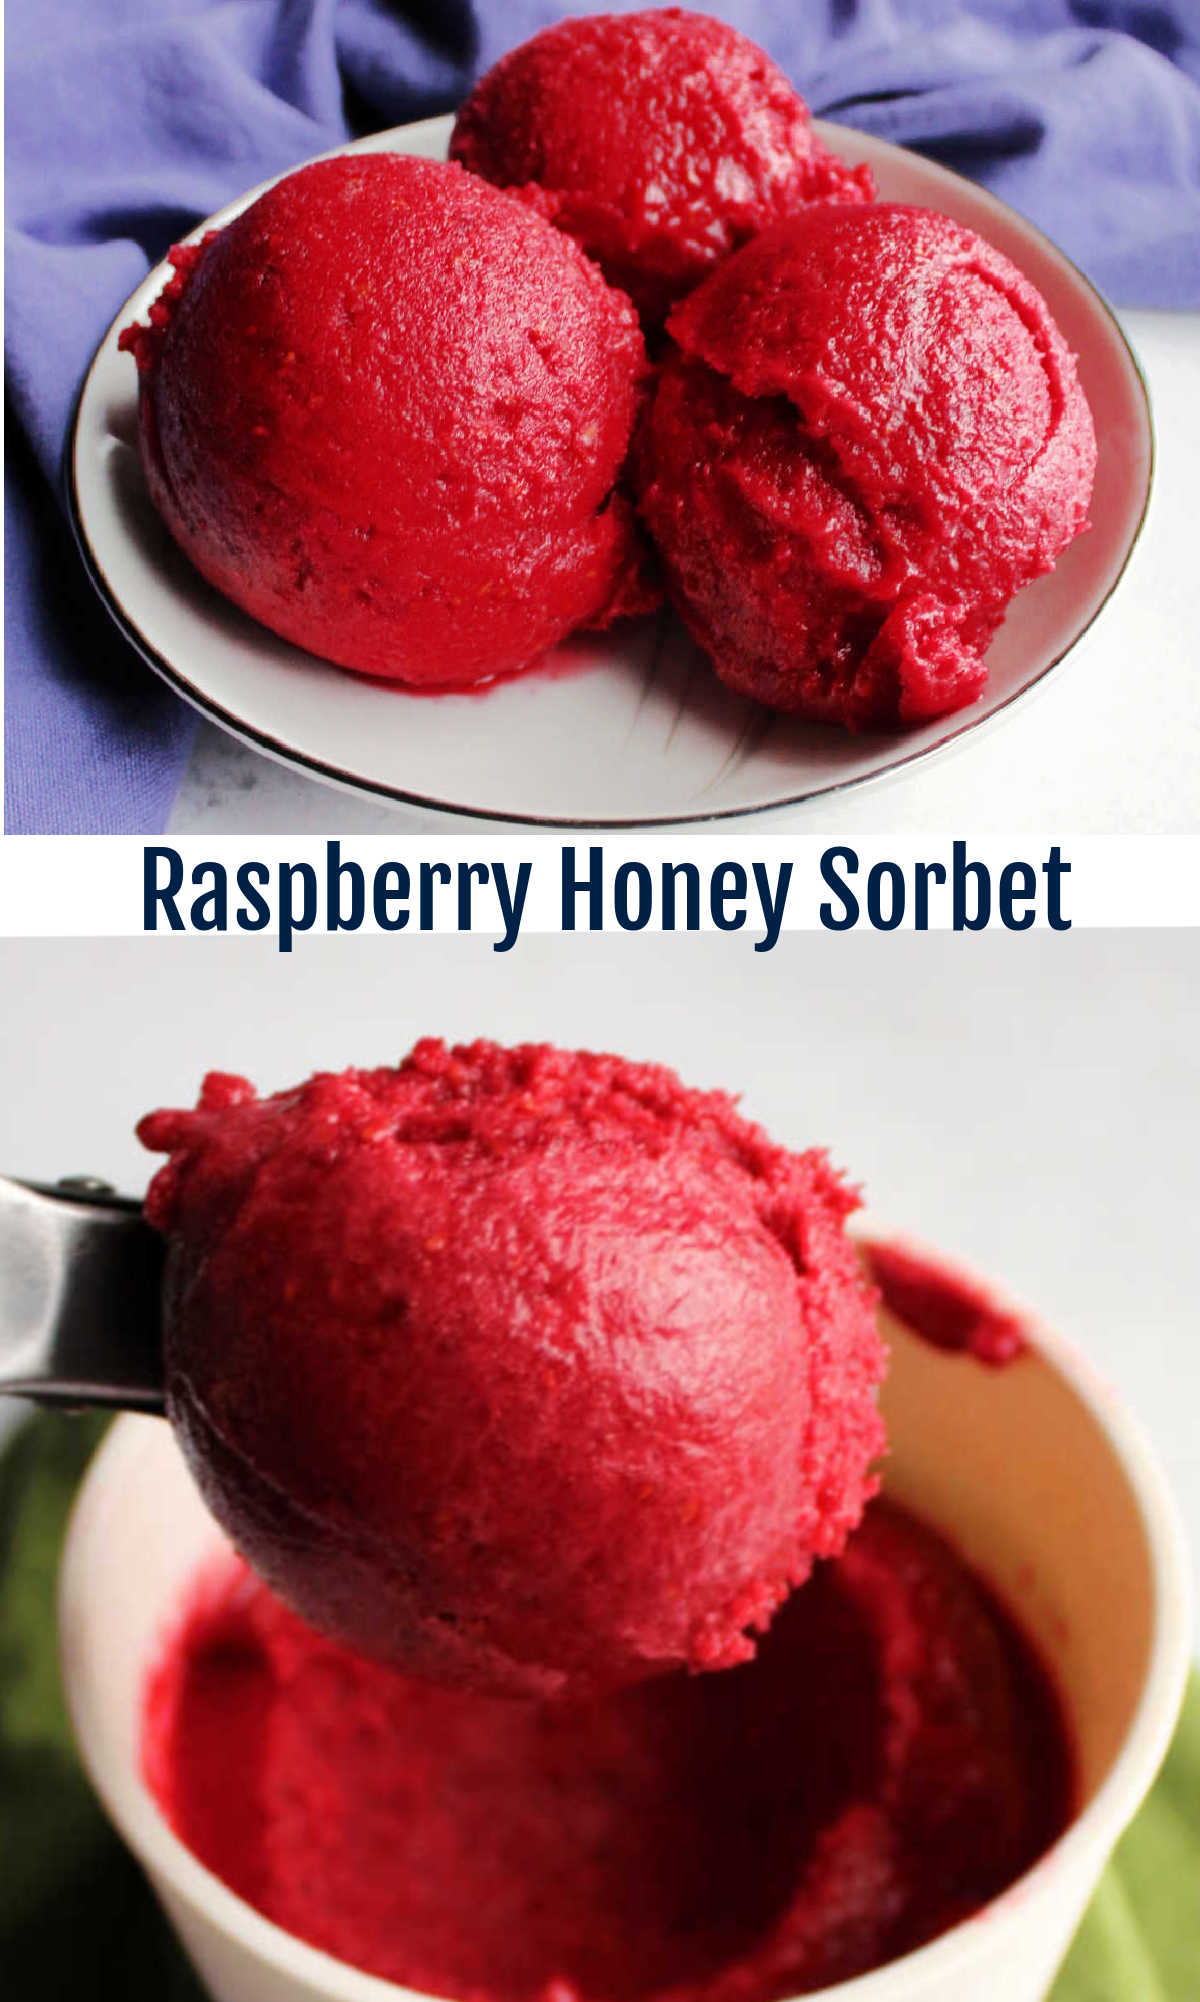 If you are looking to make a treat that still allows you to feel good about what you are putting in your body, this homemade raspberry sorbet is perfect! It is the perfect balance of sweet and a tiny bit tart. It is loaded with fruit and the goodness of honey. Luckily it is super simple to make and tastes fresh and delicious.